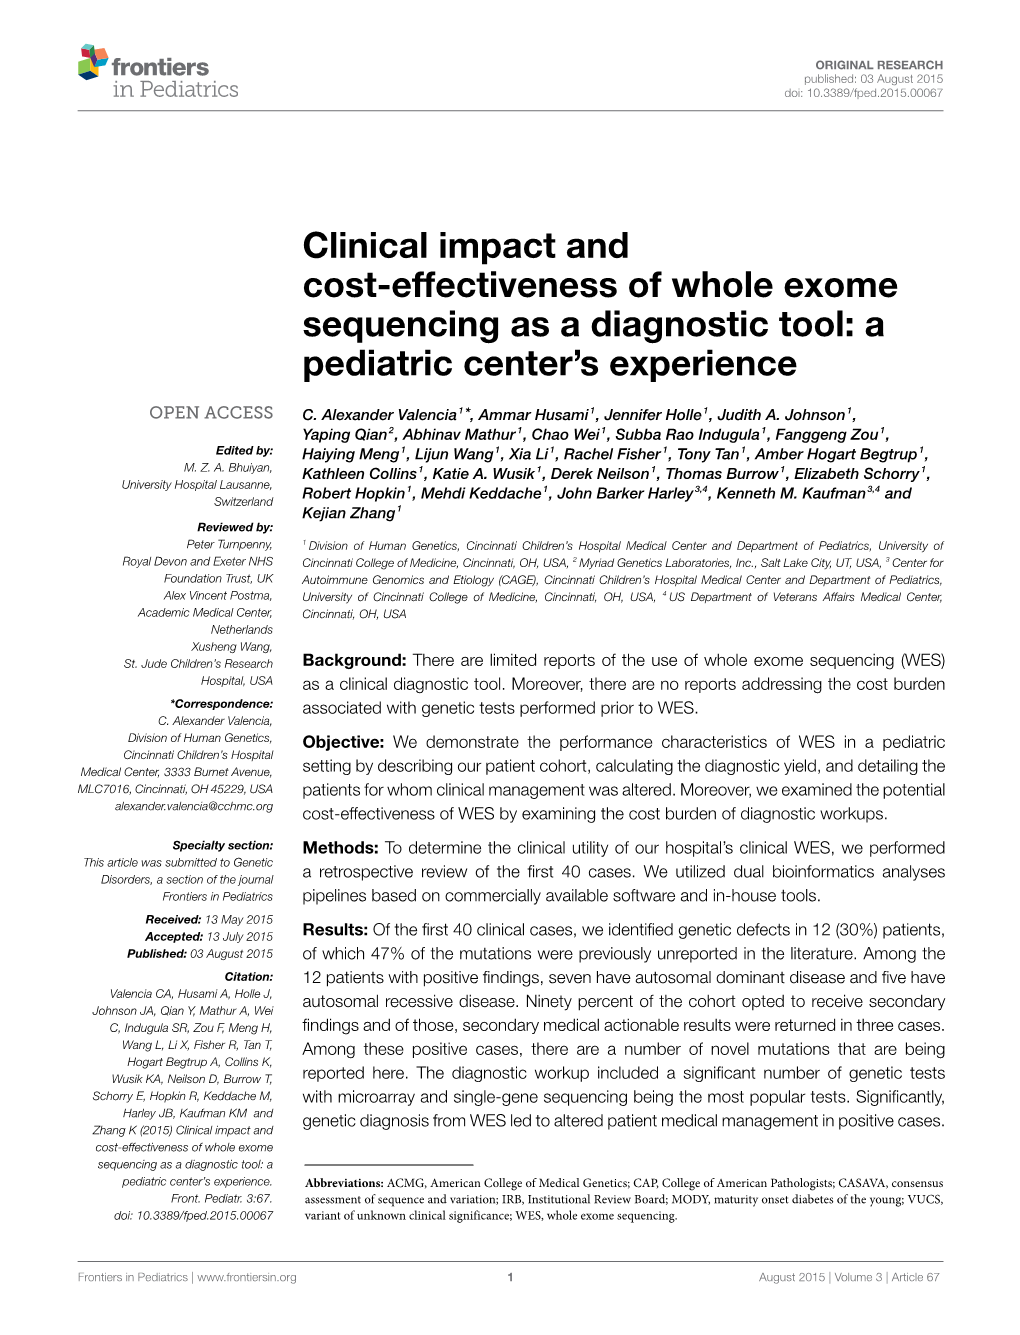 Clinical Impact and Cost-Effectiveness of Whole Exome Sequencing As a Diagnostic Tool: a Pediatric Center’S Experience